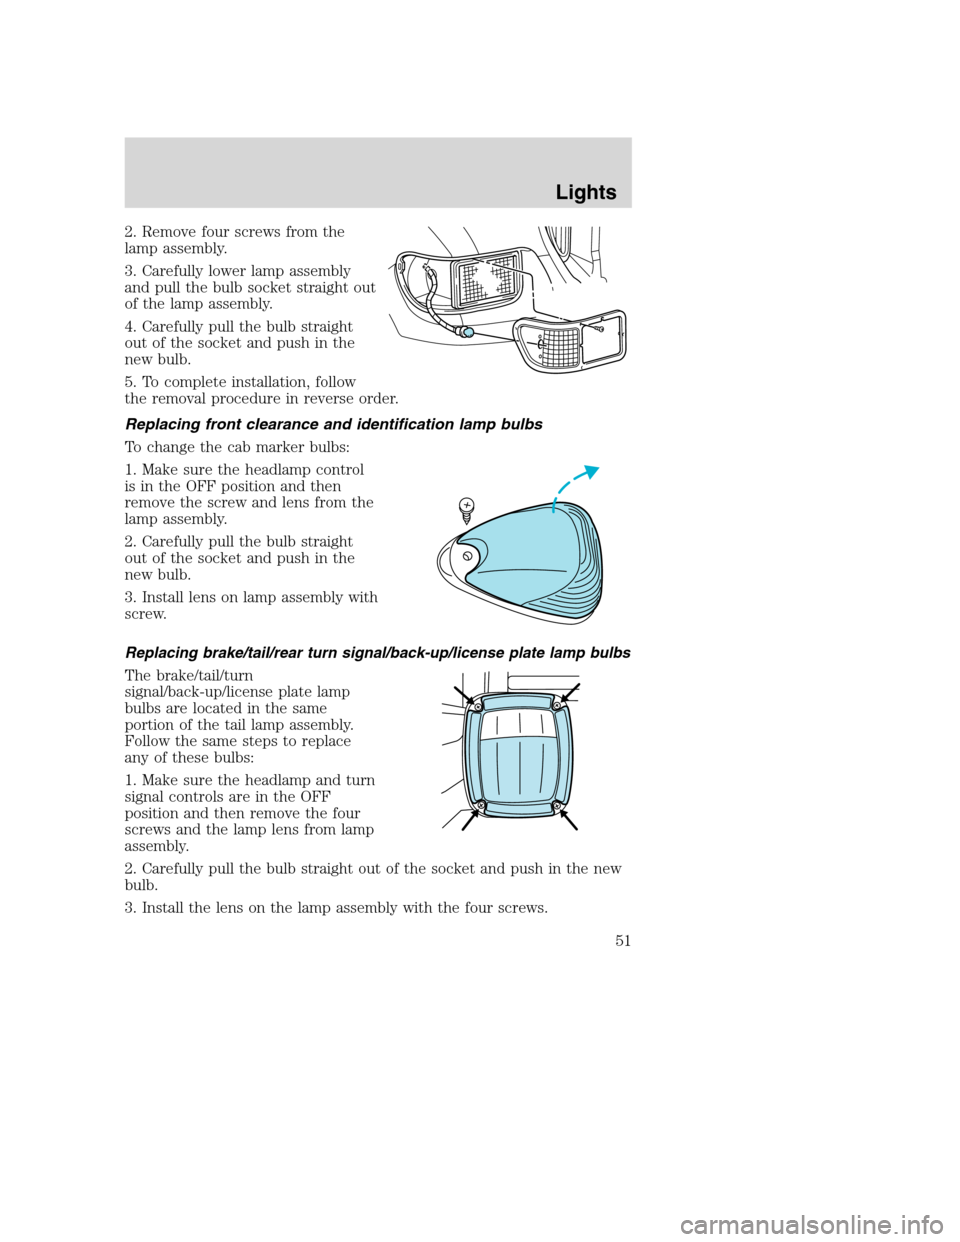 FORD F650 2005 11.G Owners Manual 2. Remove four screws from the
lamp assembly.
3. Carefully lower lamp assembly
and pull the bulb socket straight out
of the lamp assembly.
4. Carefully pull the bulb straight
out of the socket and pus